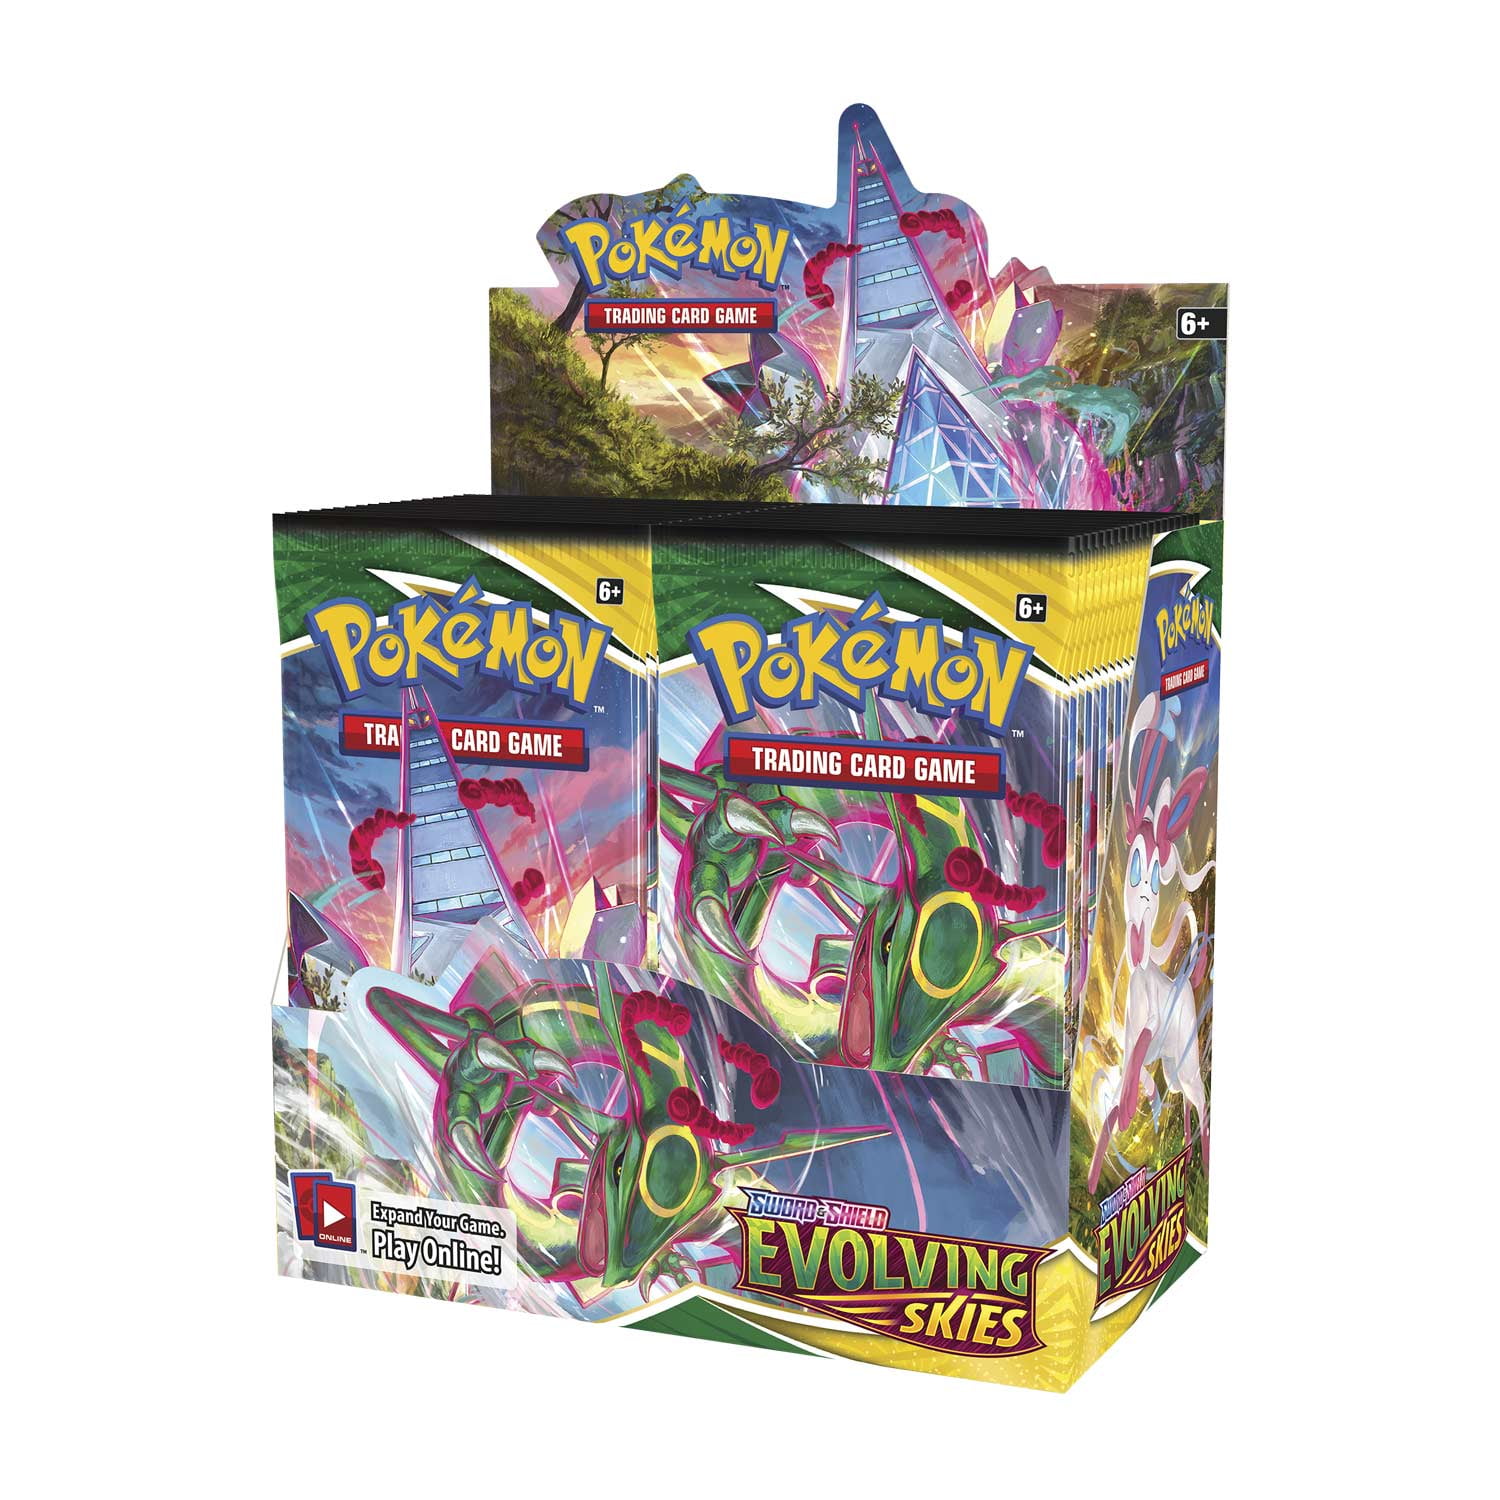 From Factory Sealed Box 10 Booster Pack Lot Pokemon Sword and Shield 